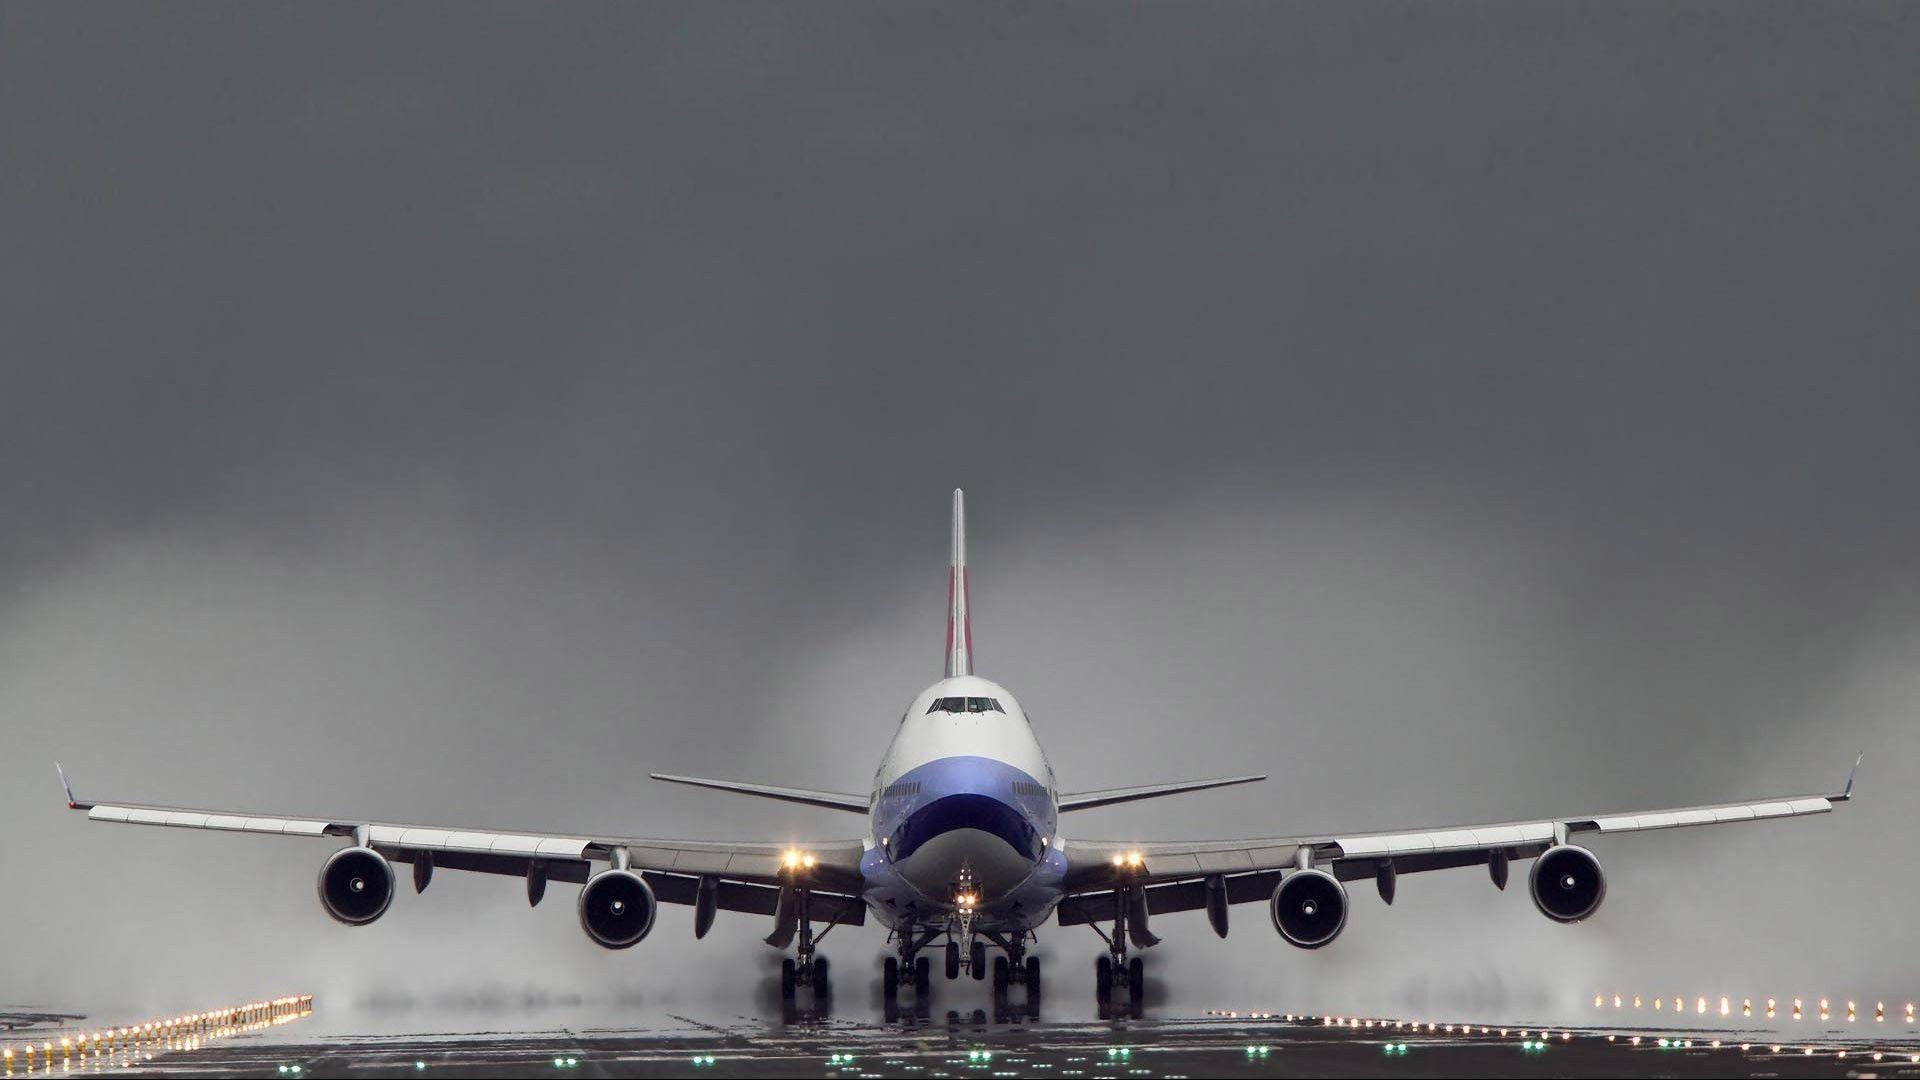 Awesome Boeing Wallpaper 15241 1920x1080 px